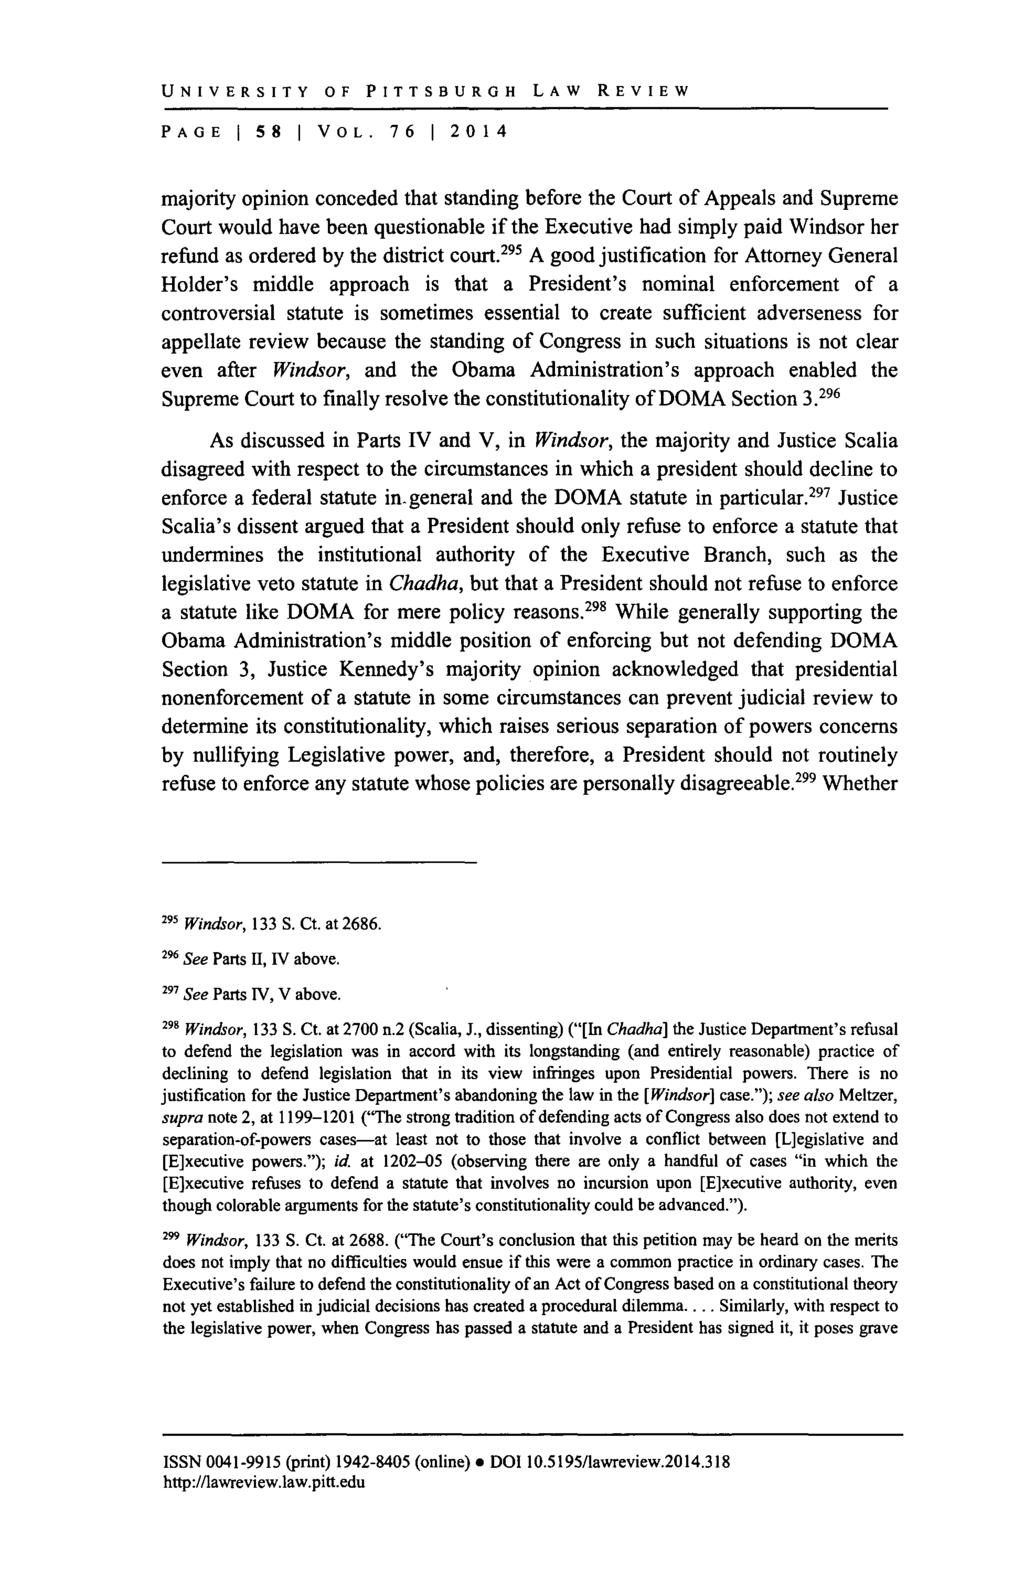 UNIVERSITY OF PITTSBURGH LAW REVIEW PAGE I 58 I VOL.